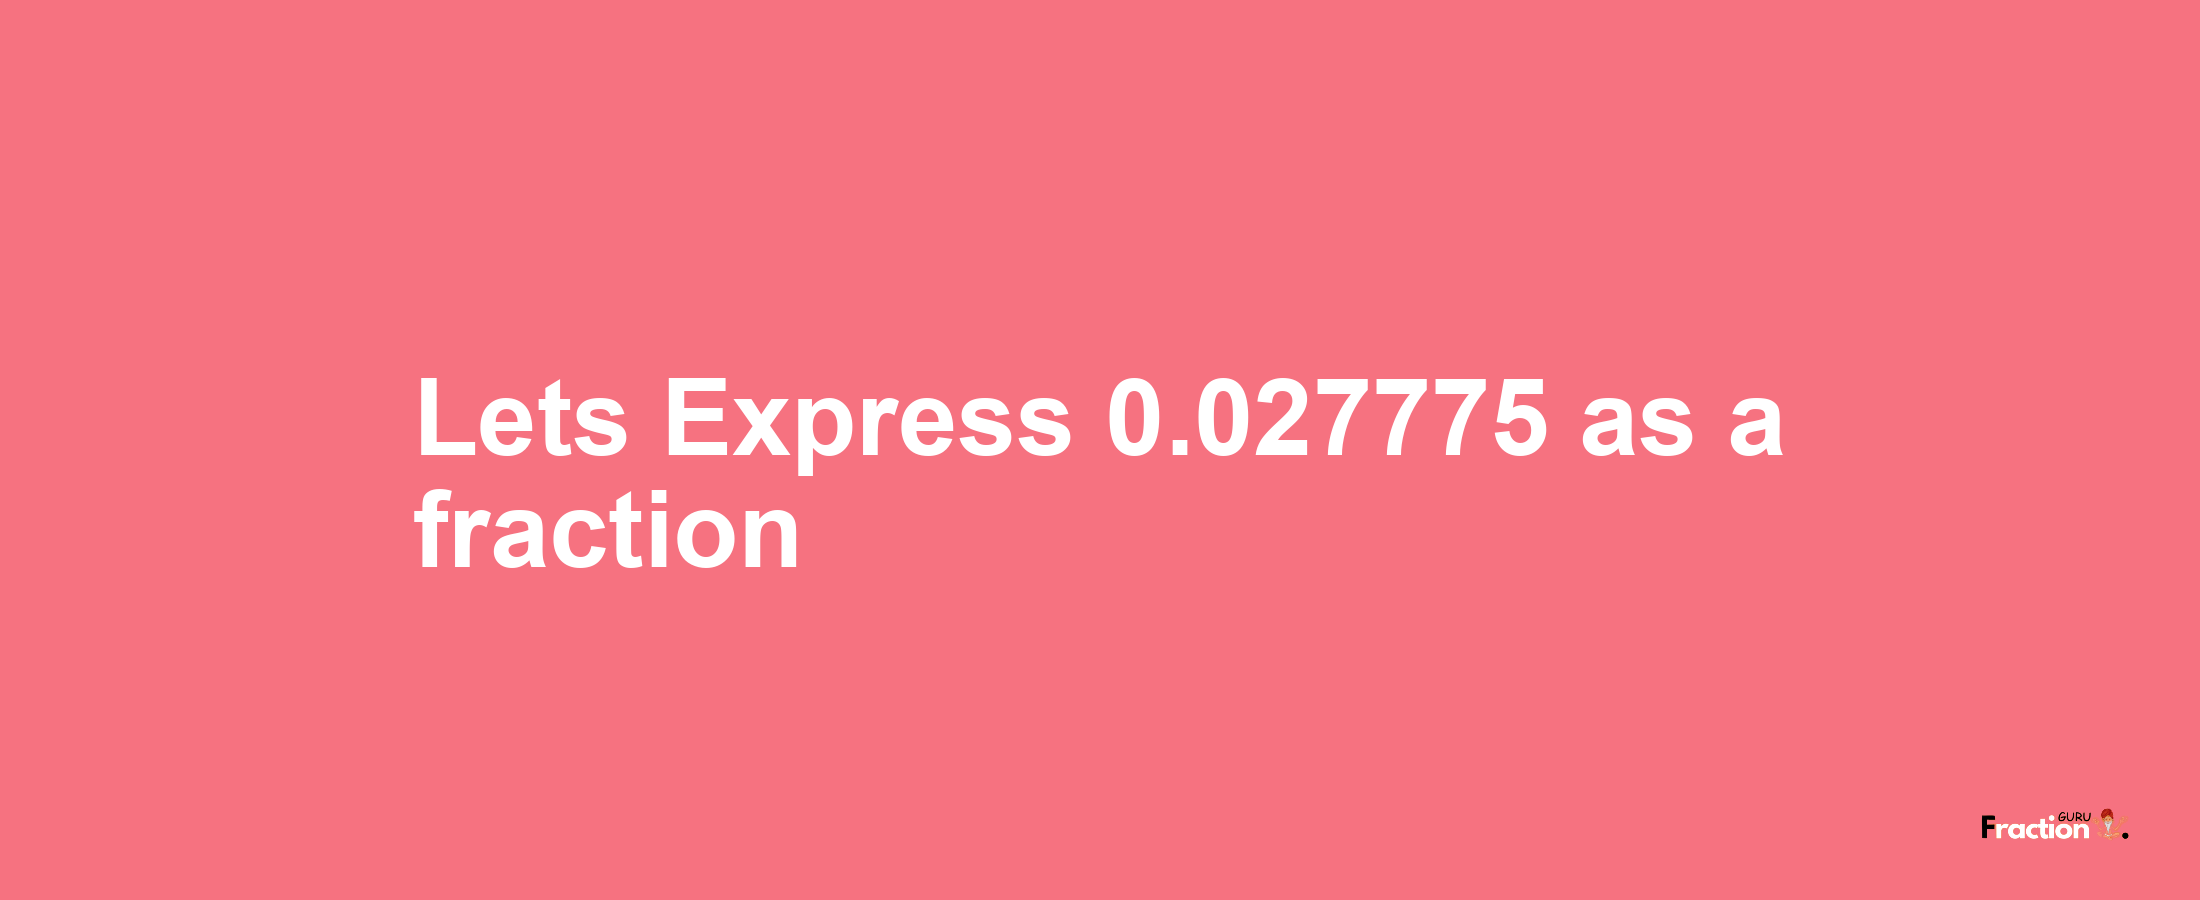 Lets Express 0.027775 as afraction